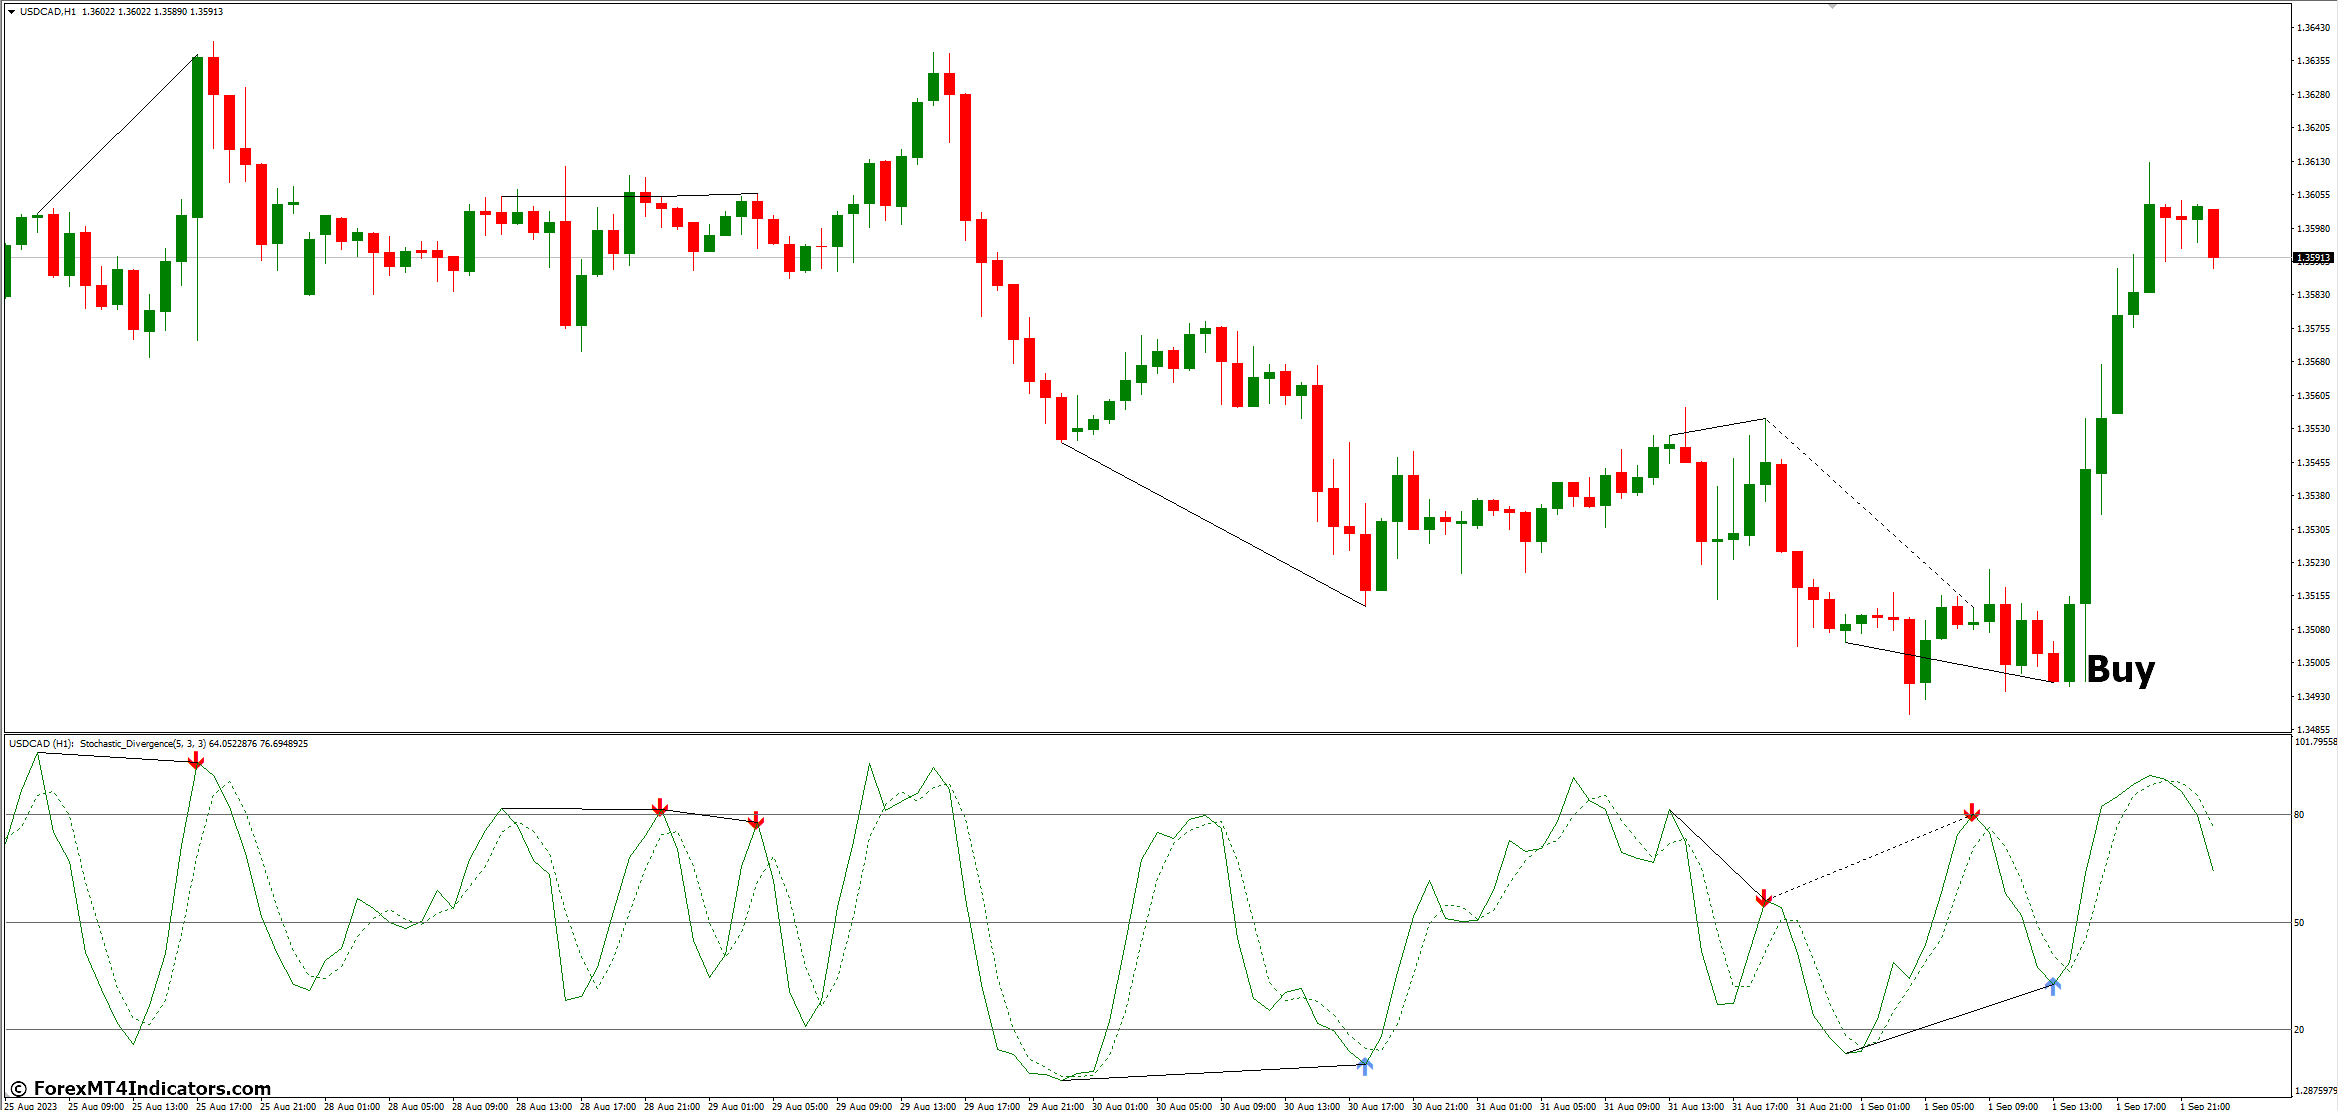 How to Trade with Stochastic Divergence MT4 Indicator - Buy Entry